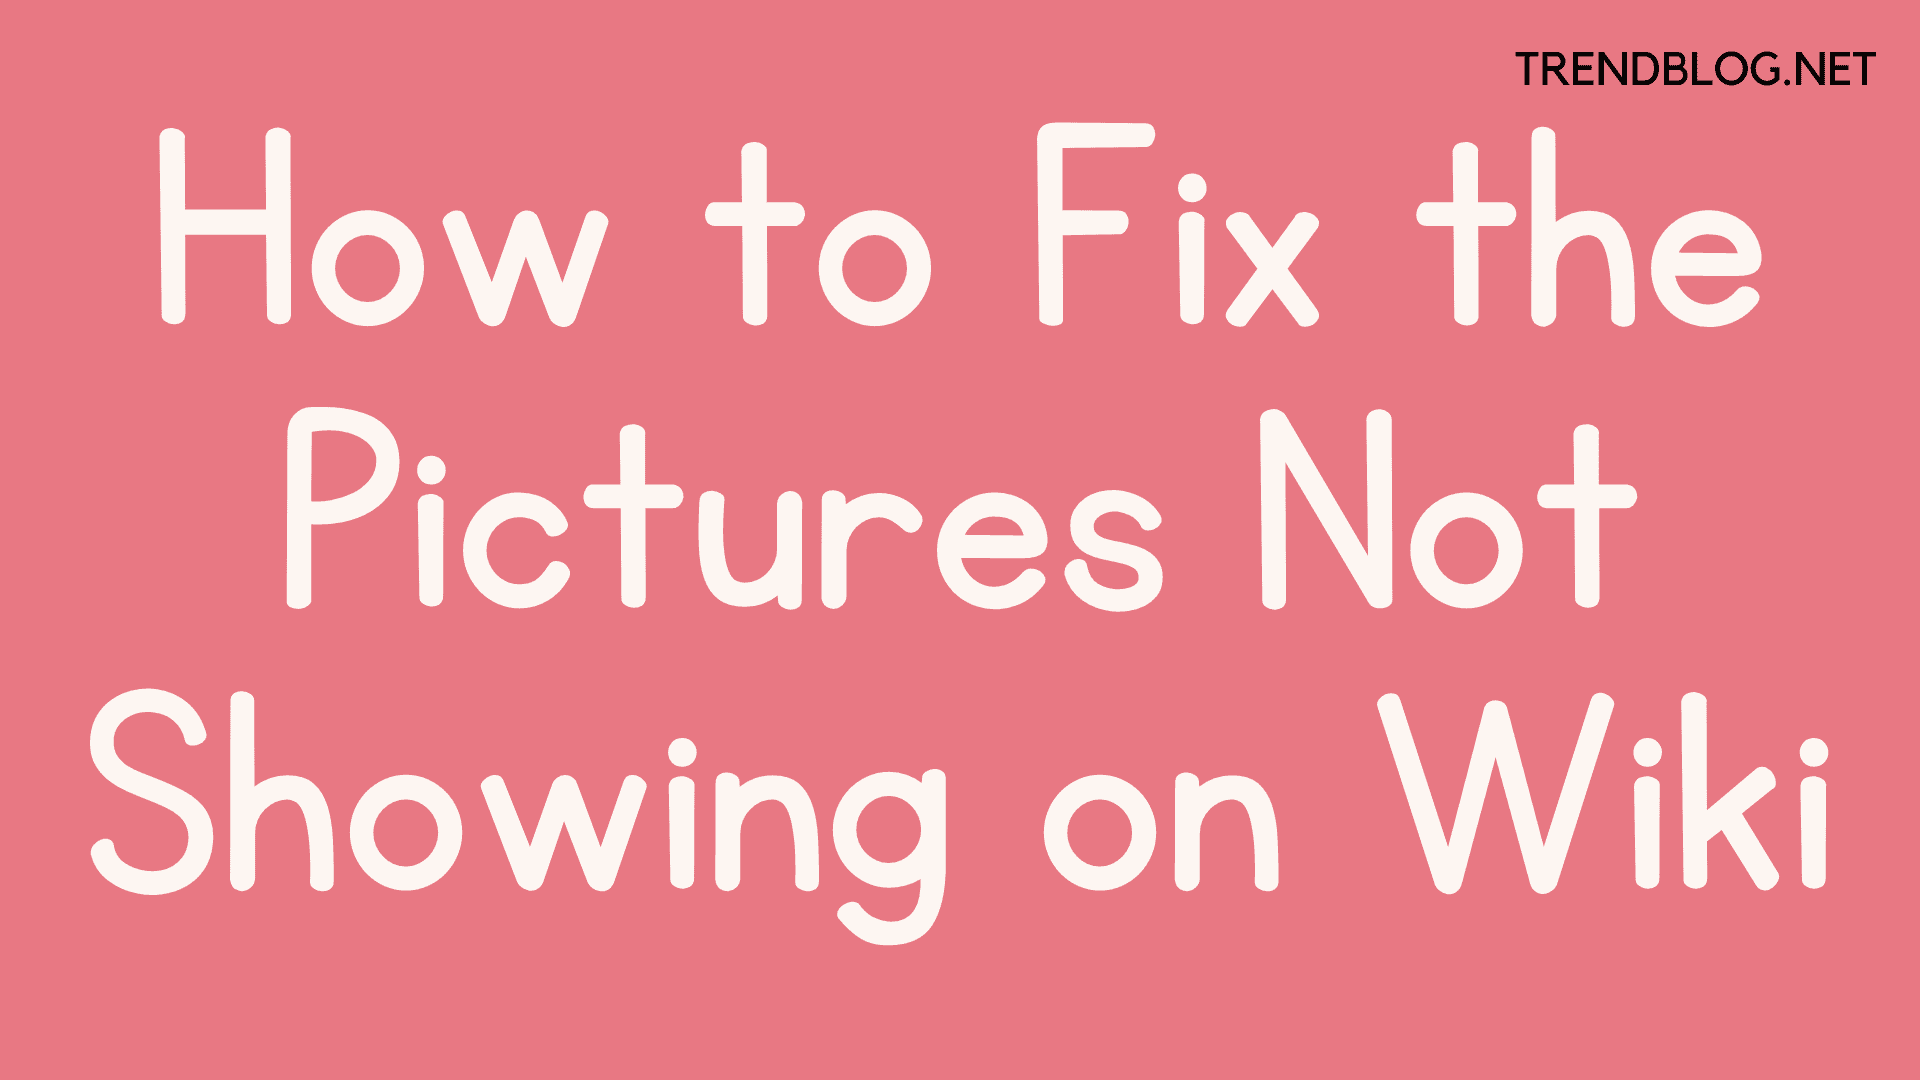 How to Fix the Pictures Not Showing on Wiki